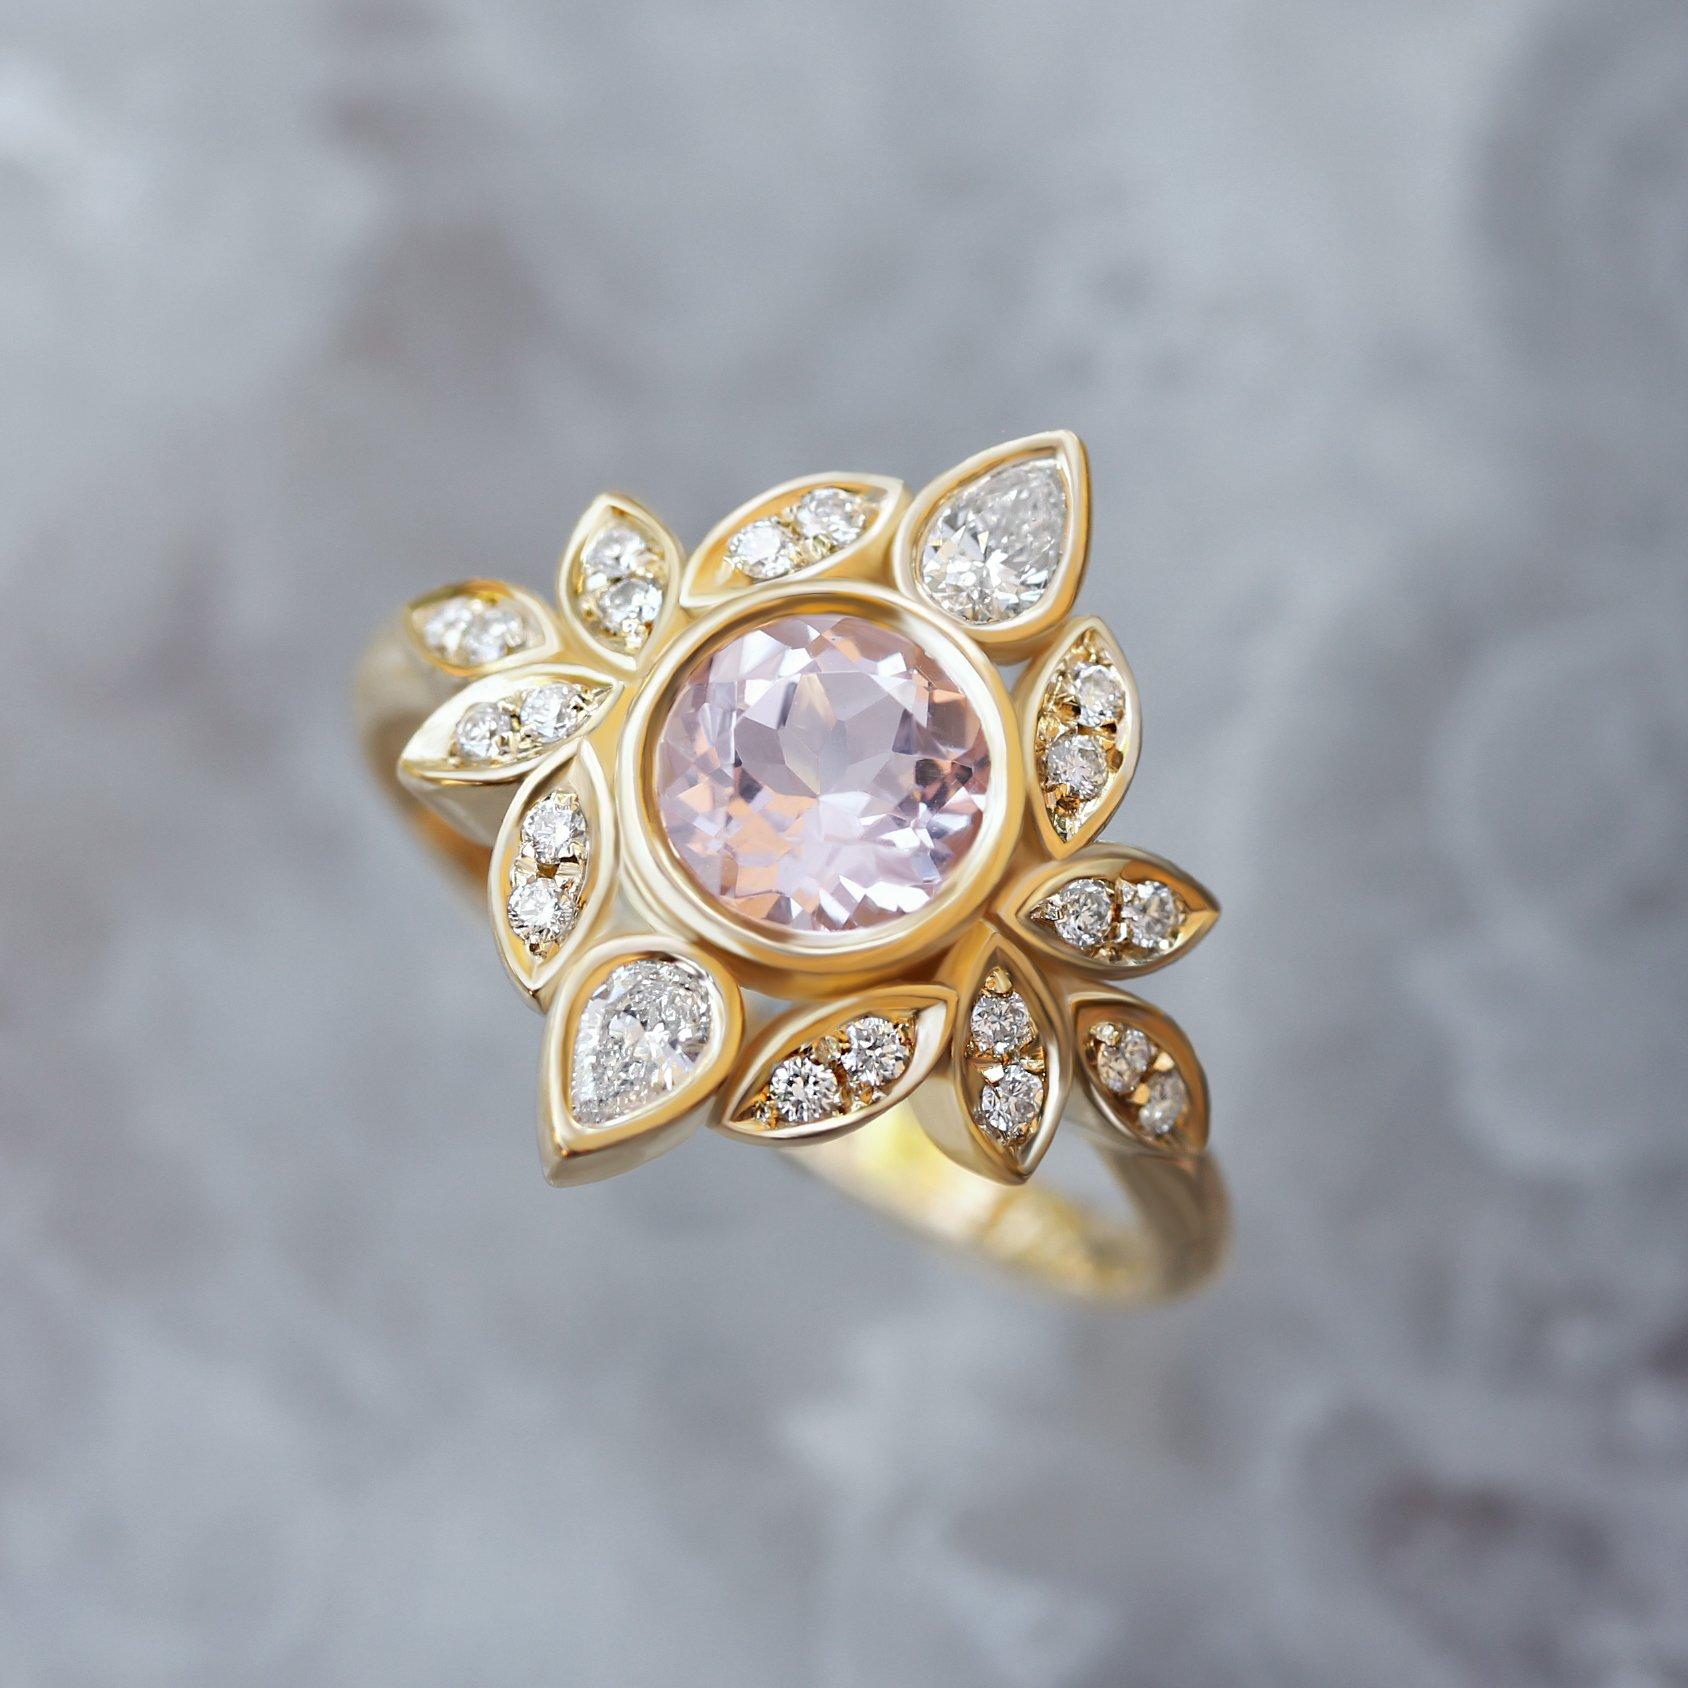 Unique Lily #5 Morganite & Diamonds Flower Engagement Ring.
The list is for the Engagement ring only.
Handmade with care. 
An original design by Silly Shiny Diamonds. 

Details:
* Center stone shape: Round.
* Center stone type: 6mm, Peach-Pink